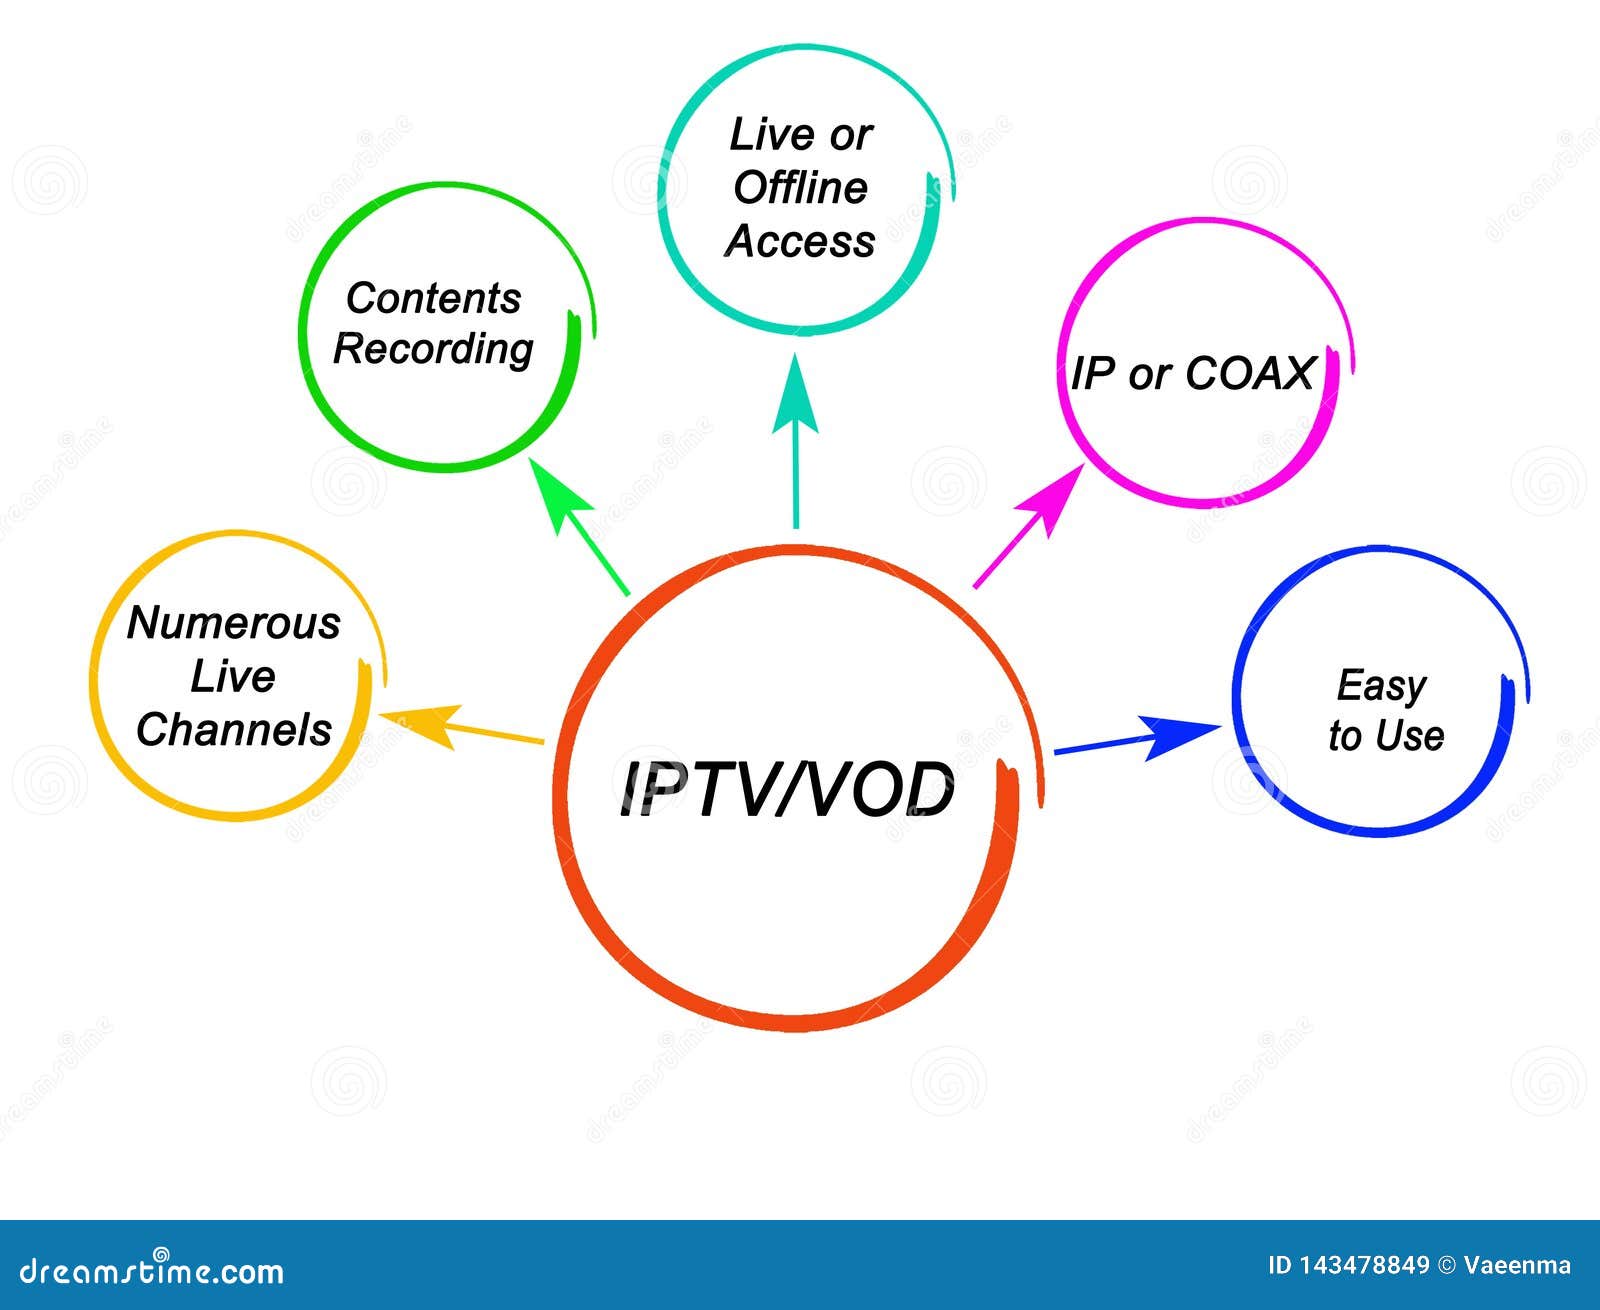 Benefits of IPTV and VOD stock illustration